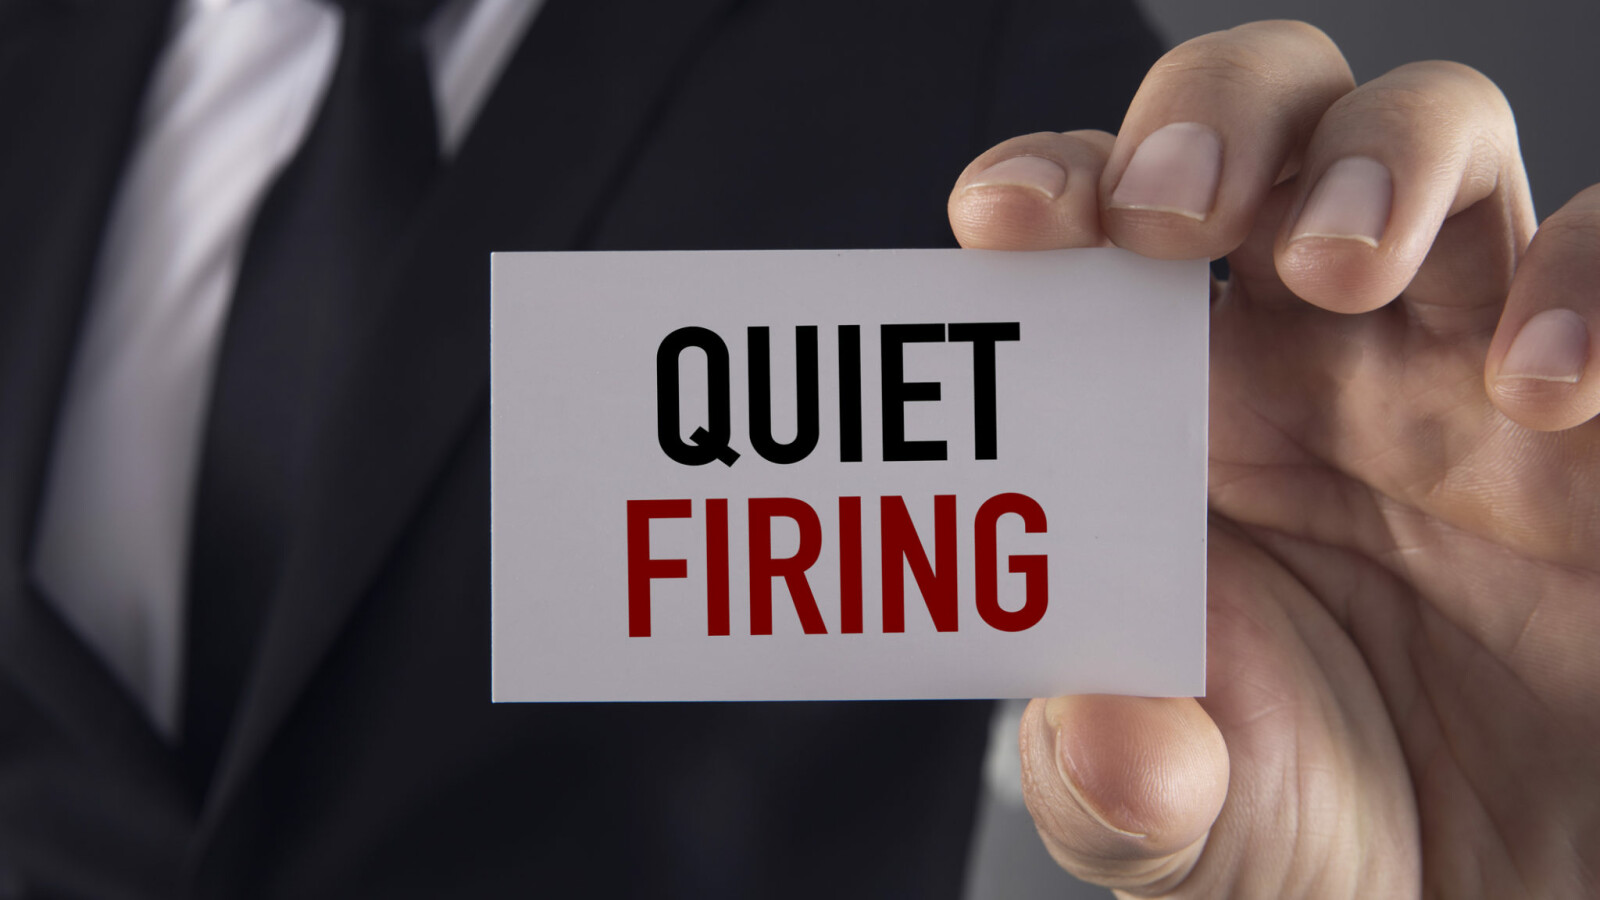 ARE YOU BEING QUIET FIRED?